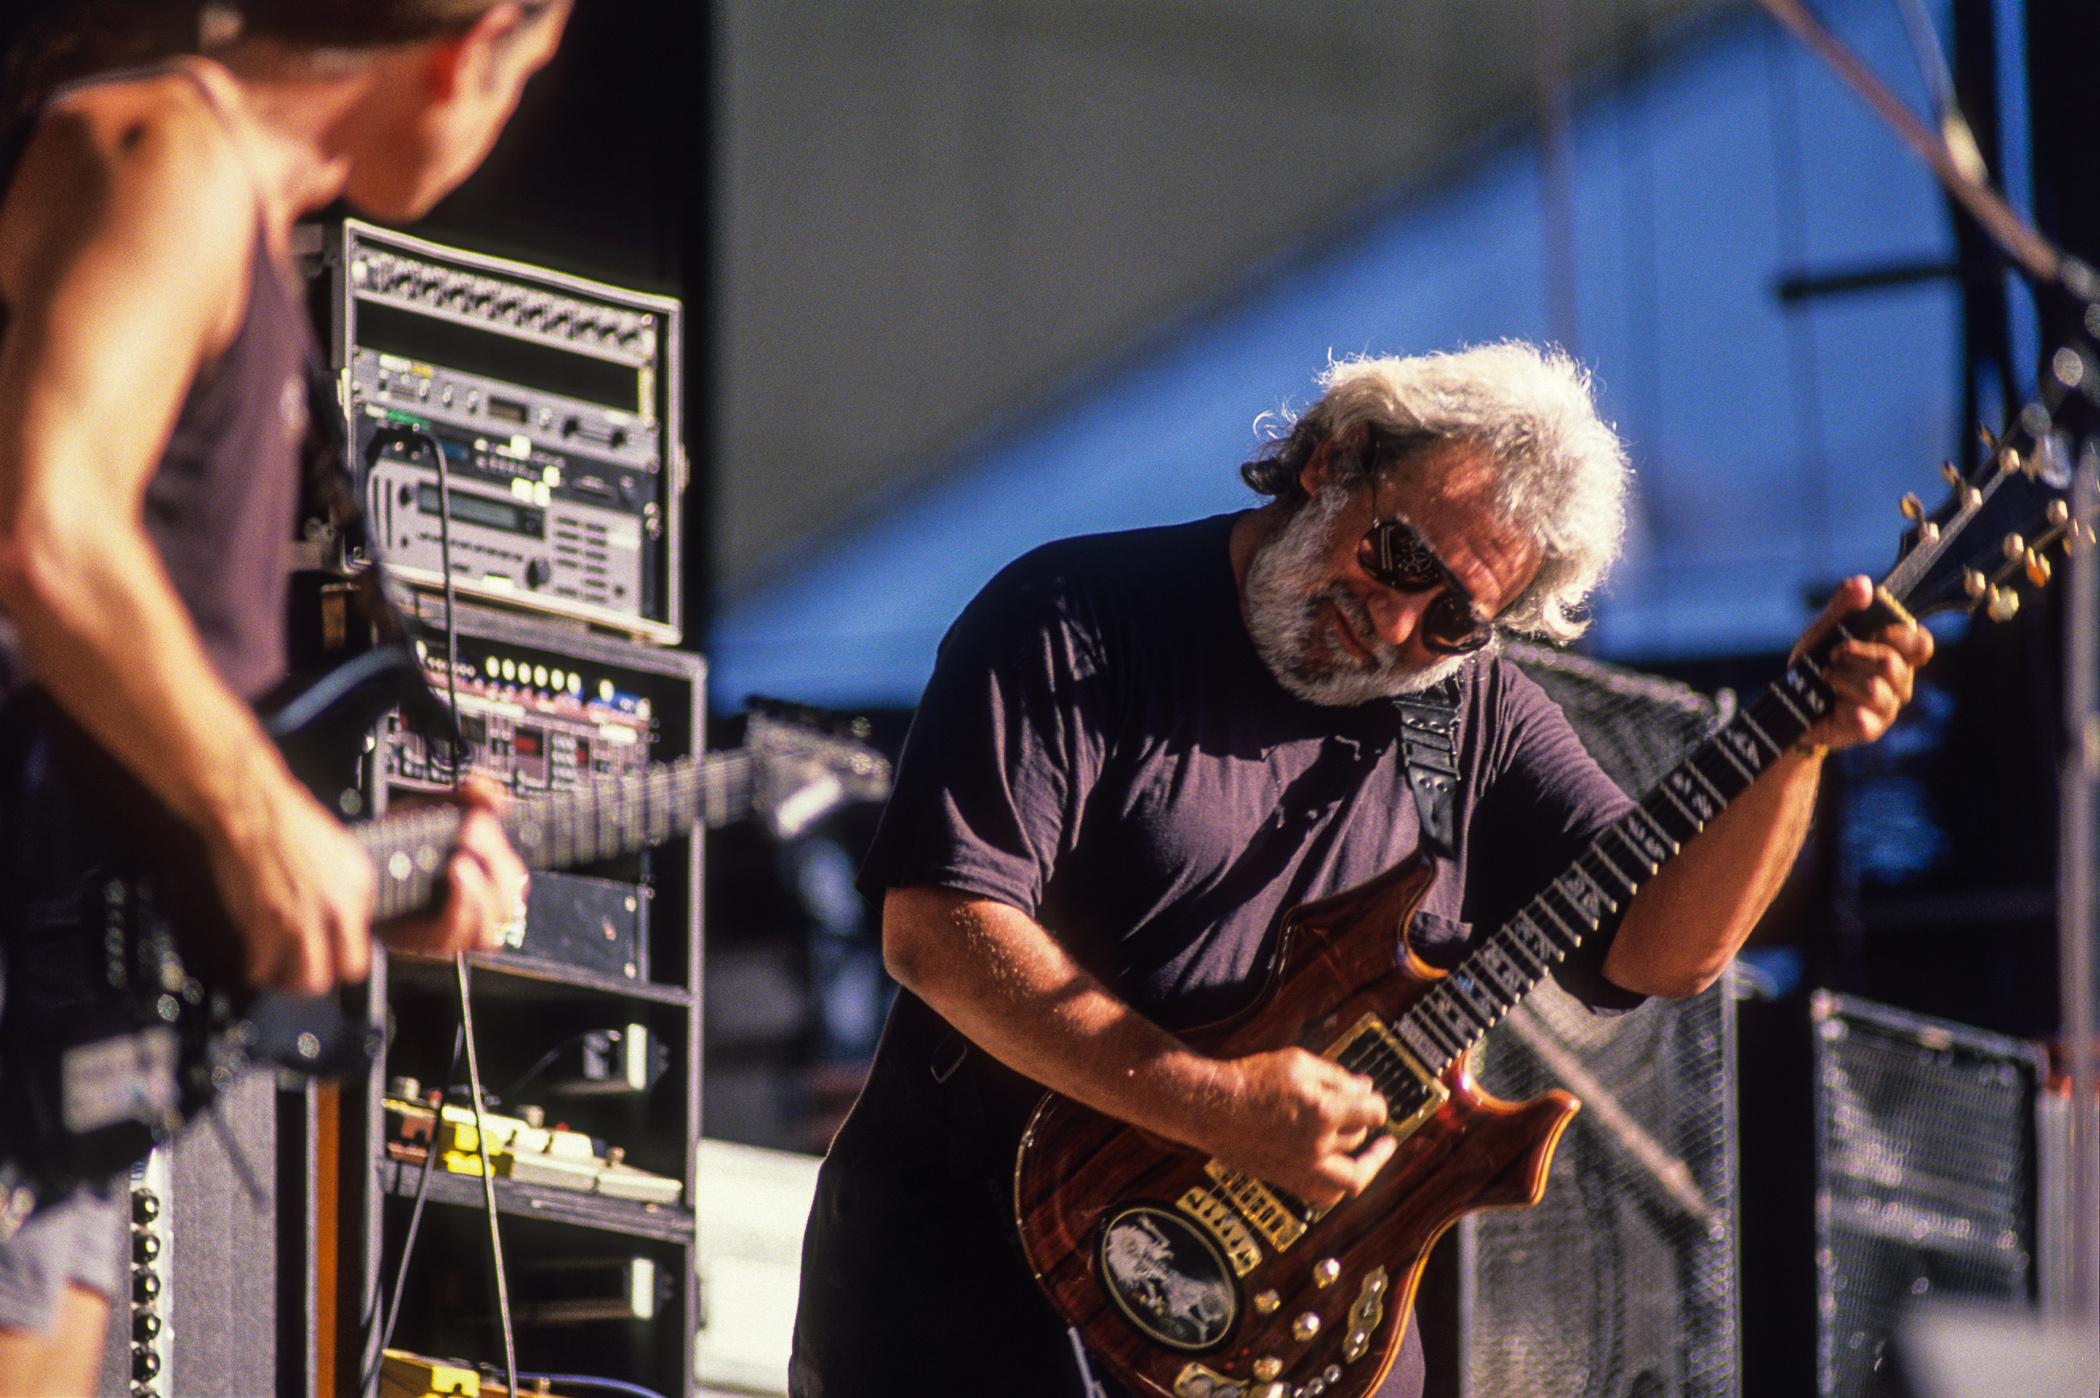 Grateful Dead: Jerry Garcia, An American musician, The Rock and Roll Hall of Fame, 1994. 2100x1400 HD Wallpaper.